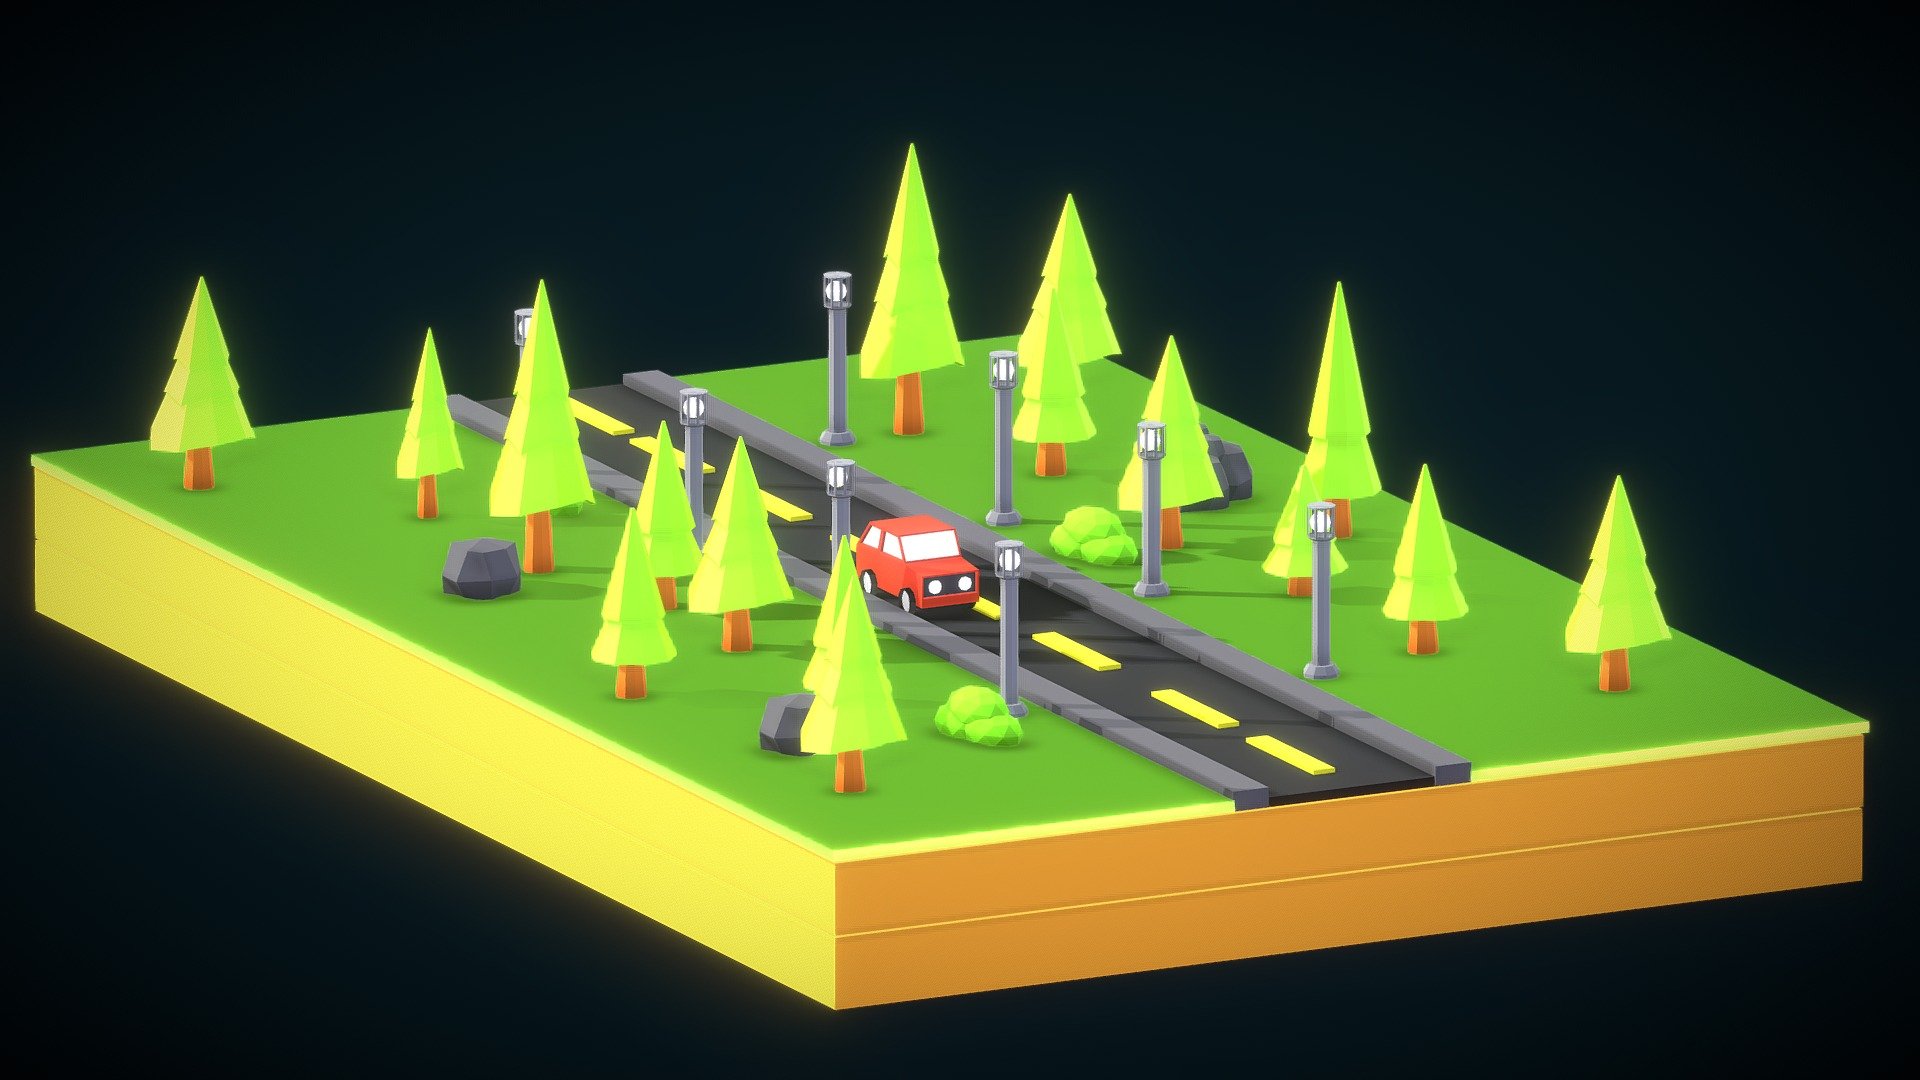 Low poly model made in blender of a forest in the night with a car in the center - LowPoly  Isometric Forest With  a Car - Download Free 3D model by ImADefaultCube117 (@20193dd085) 3d model